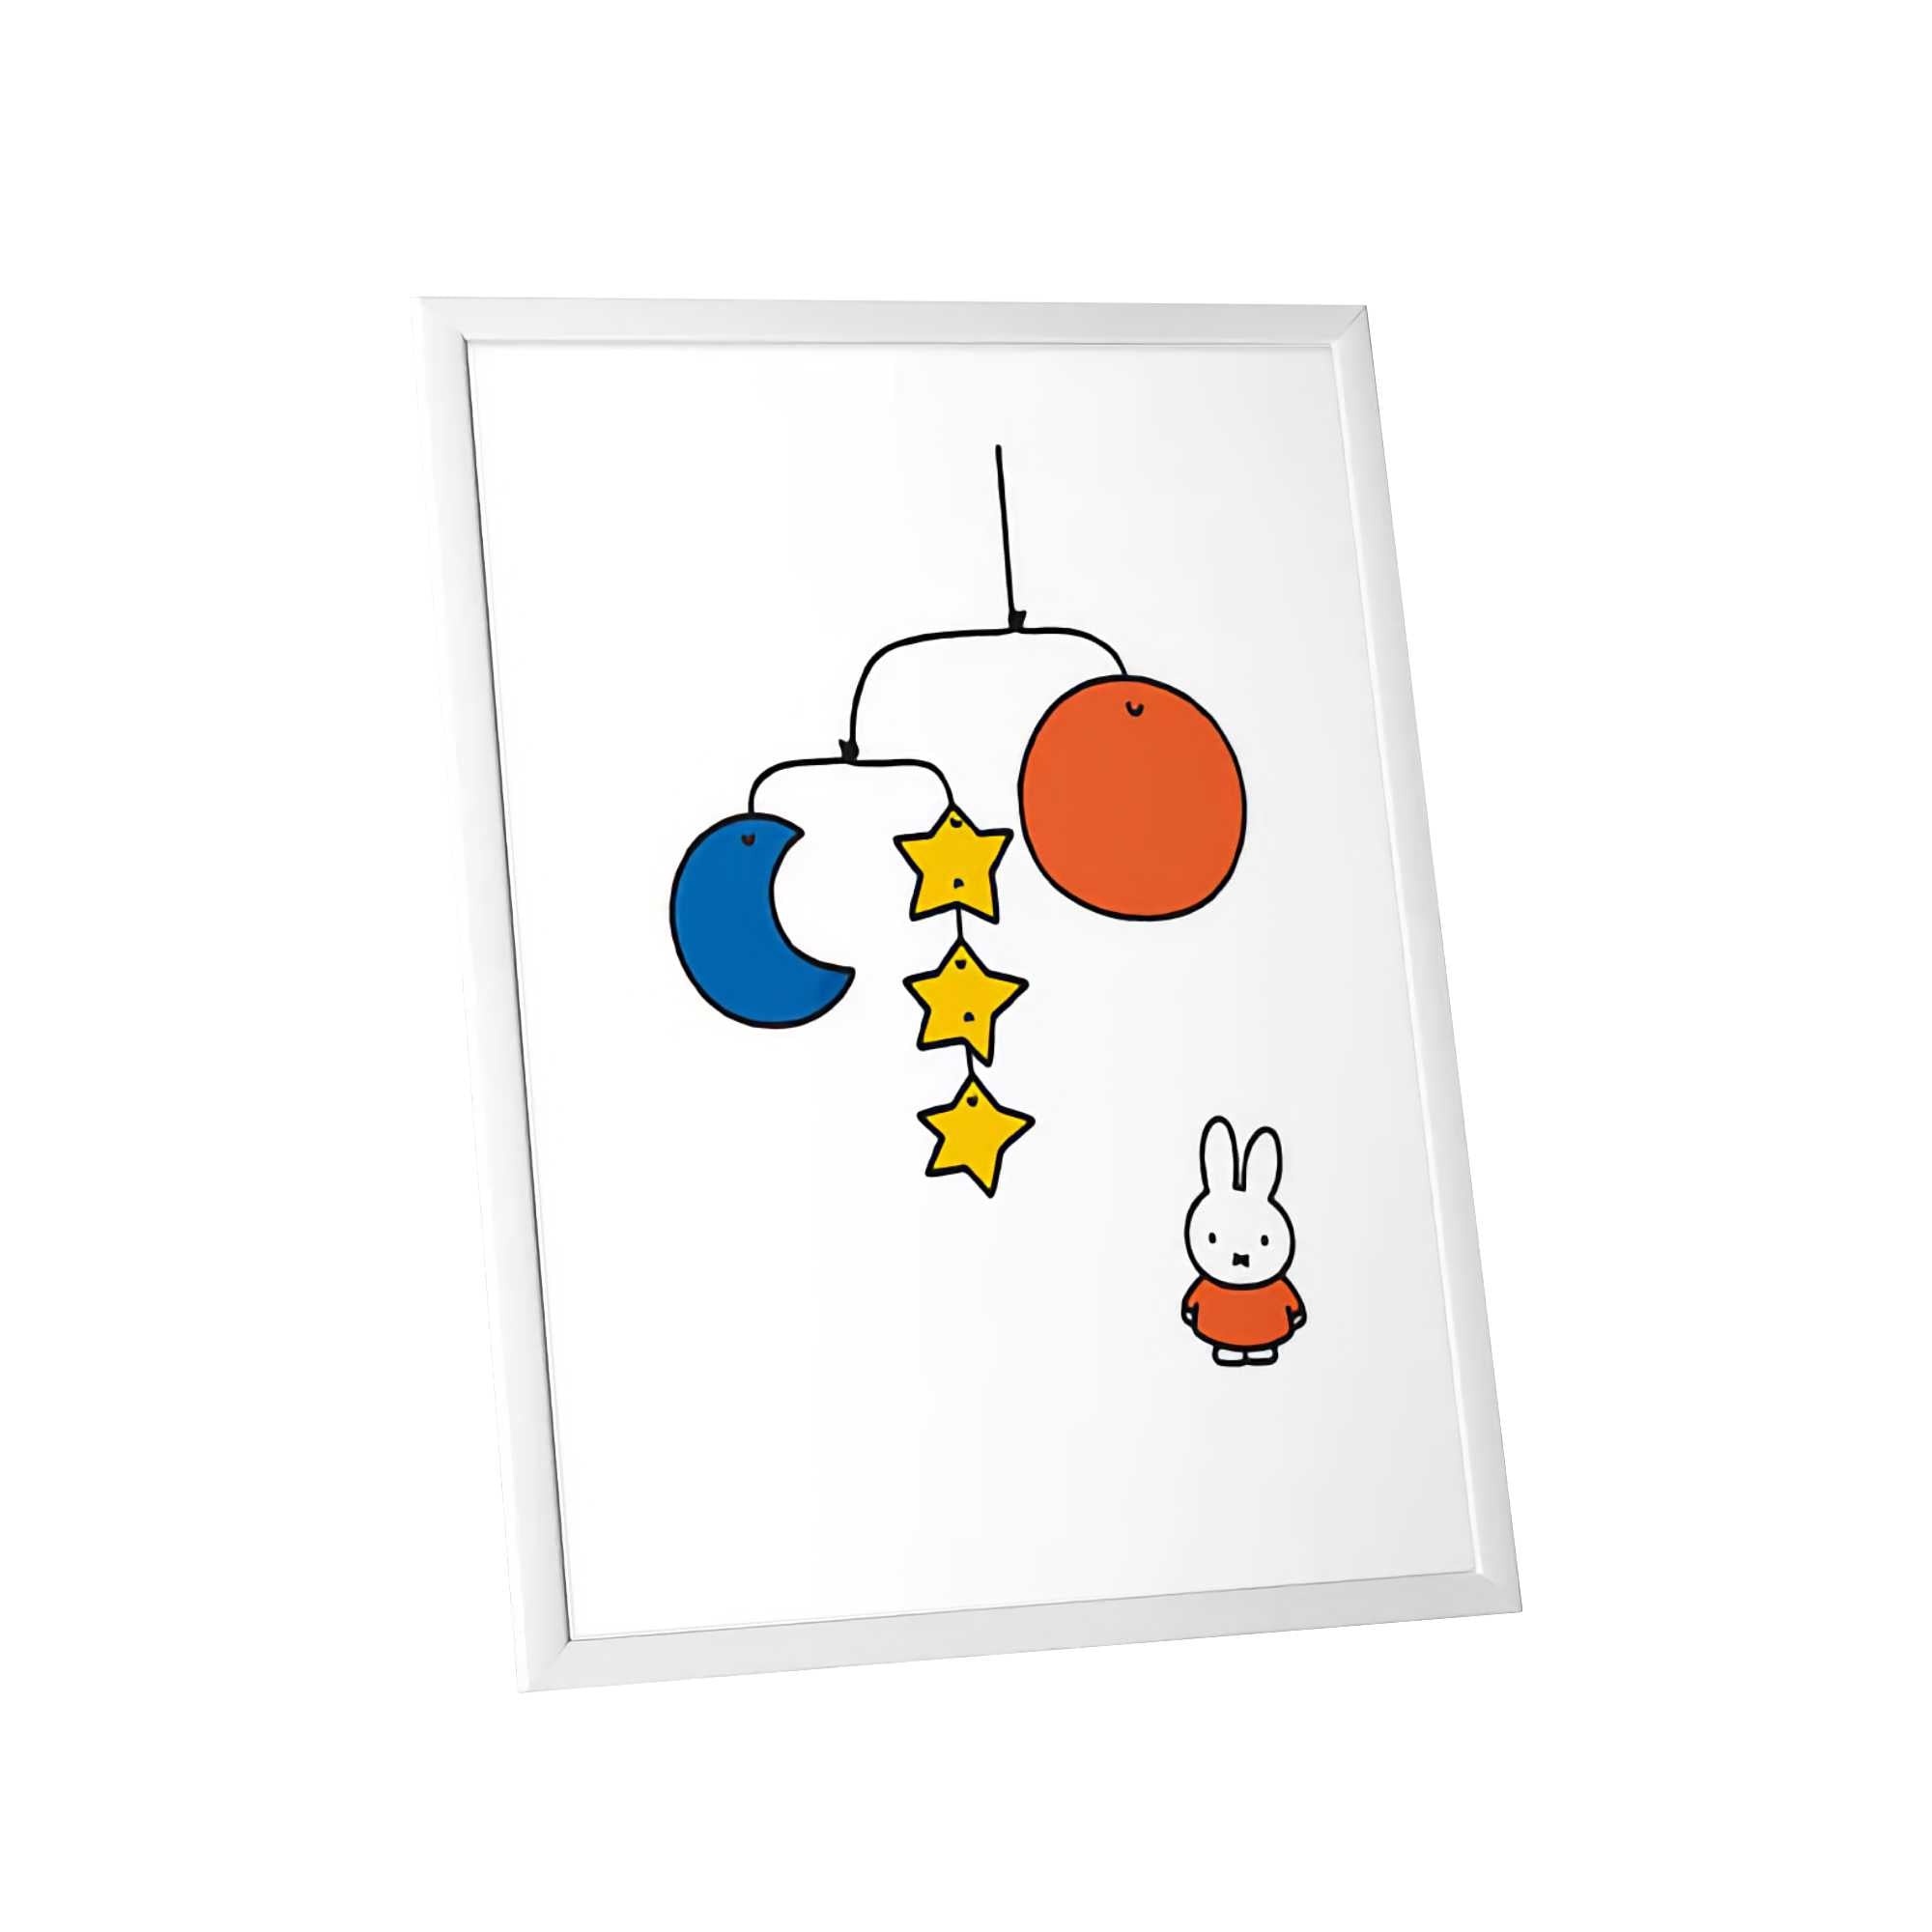 Star Editions Miffy Framed Print, planet (11x14")